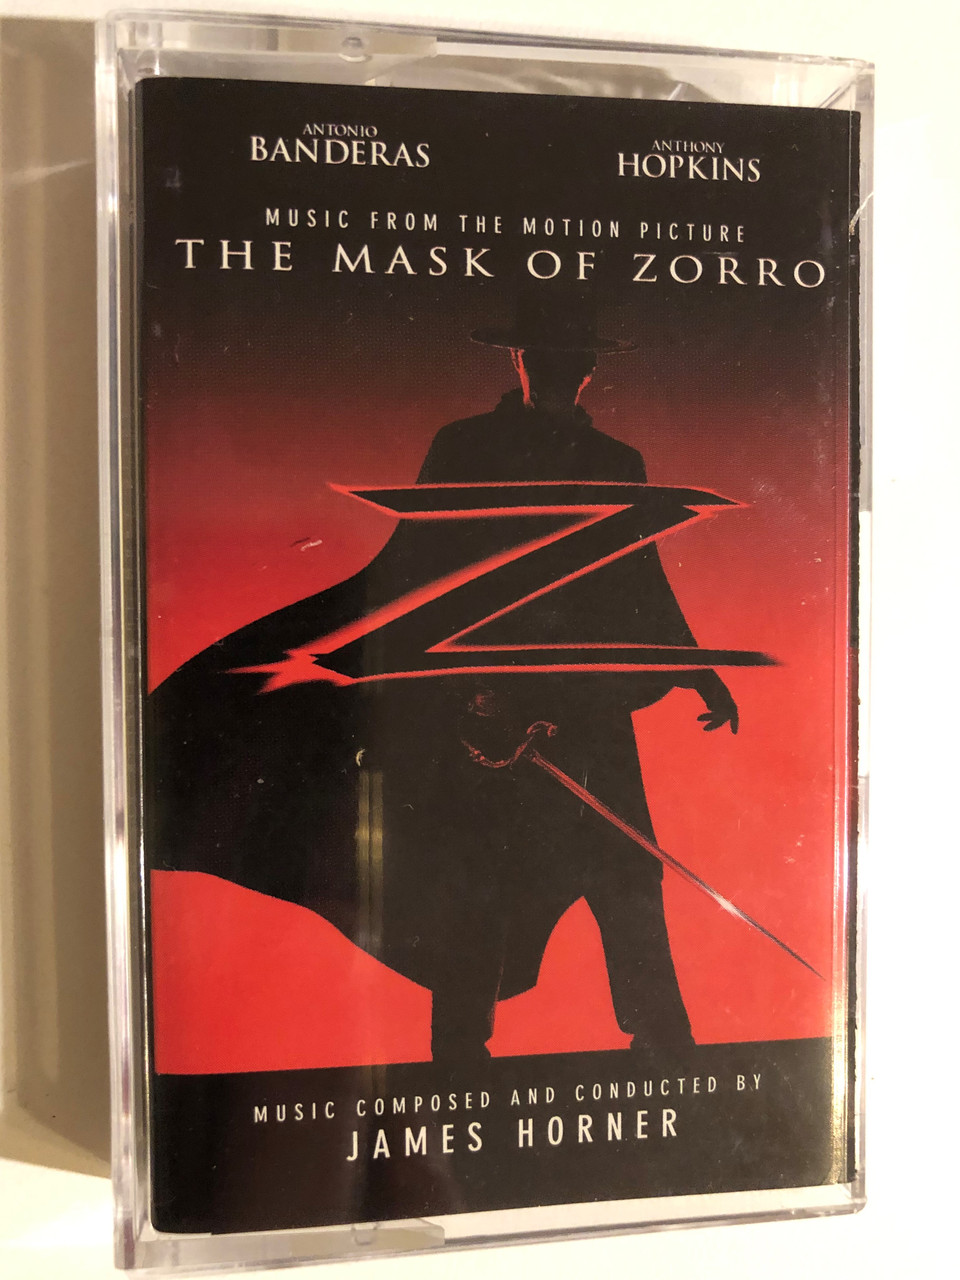 The Mask Of Zorro (Music From The Motion Picture) - Music Composed And  Conducted By James Horner / Antonio Banderas, Anthony Hopkins / Sony  Classical Audio Cassette 1998 / ST 60627 - Bible in My Language